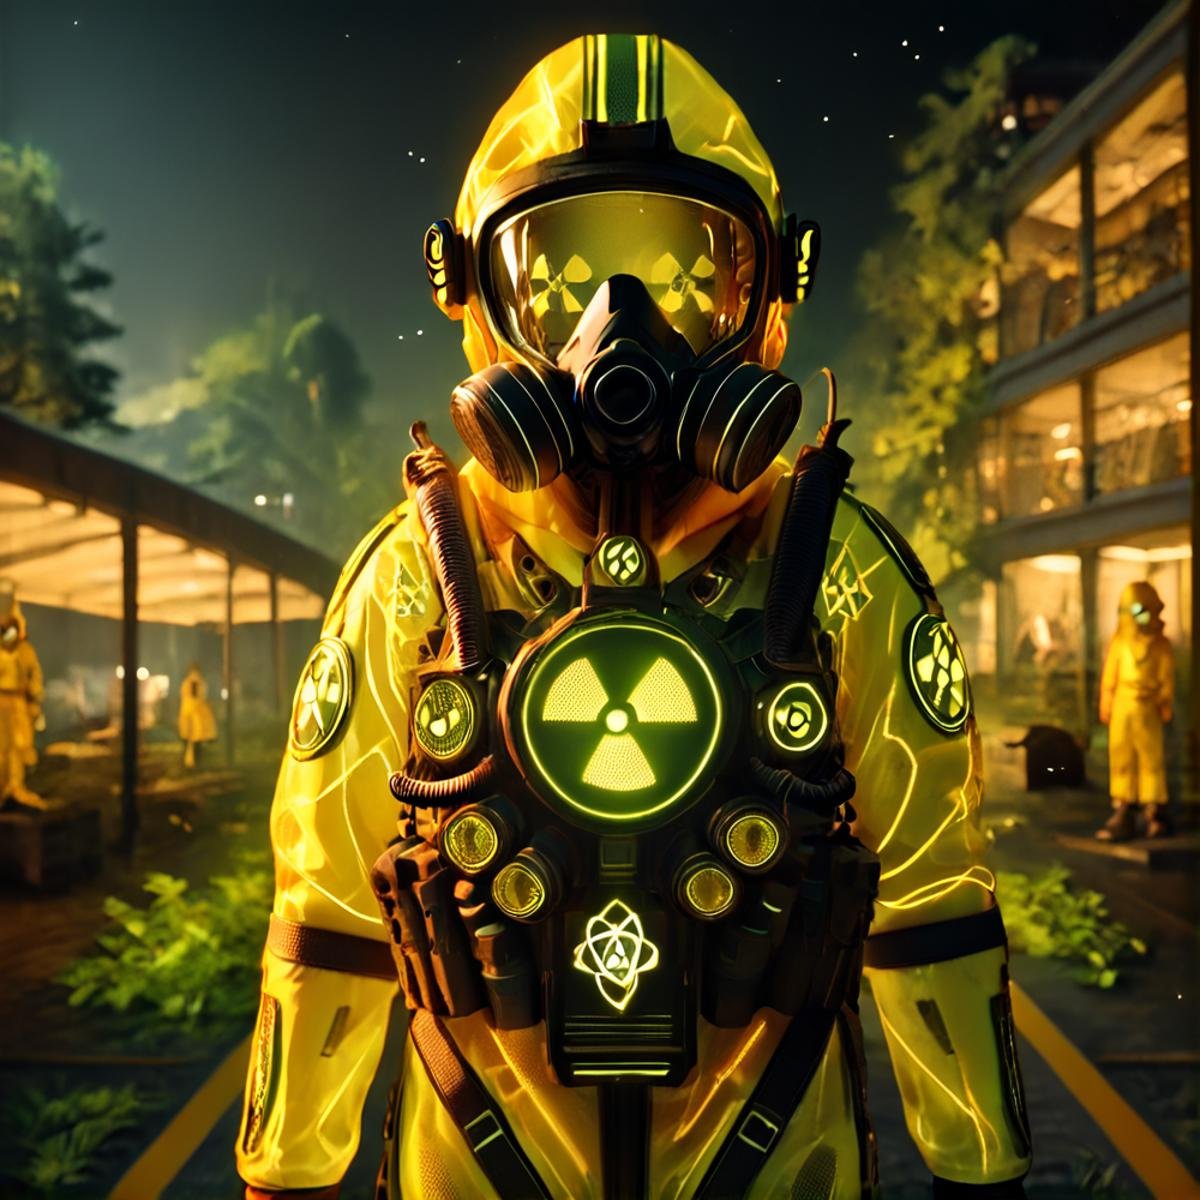 score_9, score_8_up, score_7_up,score_6_up, score_5_up,score_4_up, source_anime BREAK  overalldetail, <lora:nuclearhazard_Pony:1>nuclearhazard,1girl,clothes,, transparent, , see-through,yellow theme,hazmat suit,gasmask